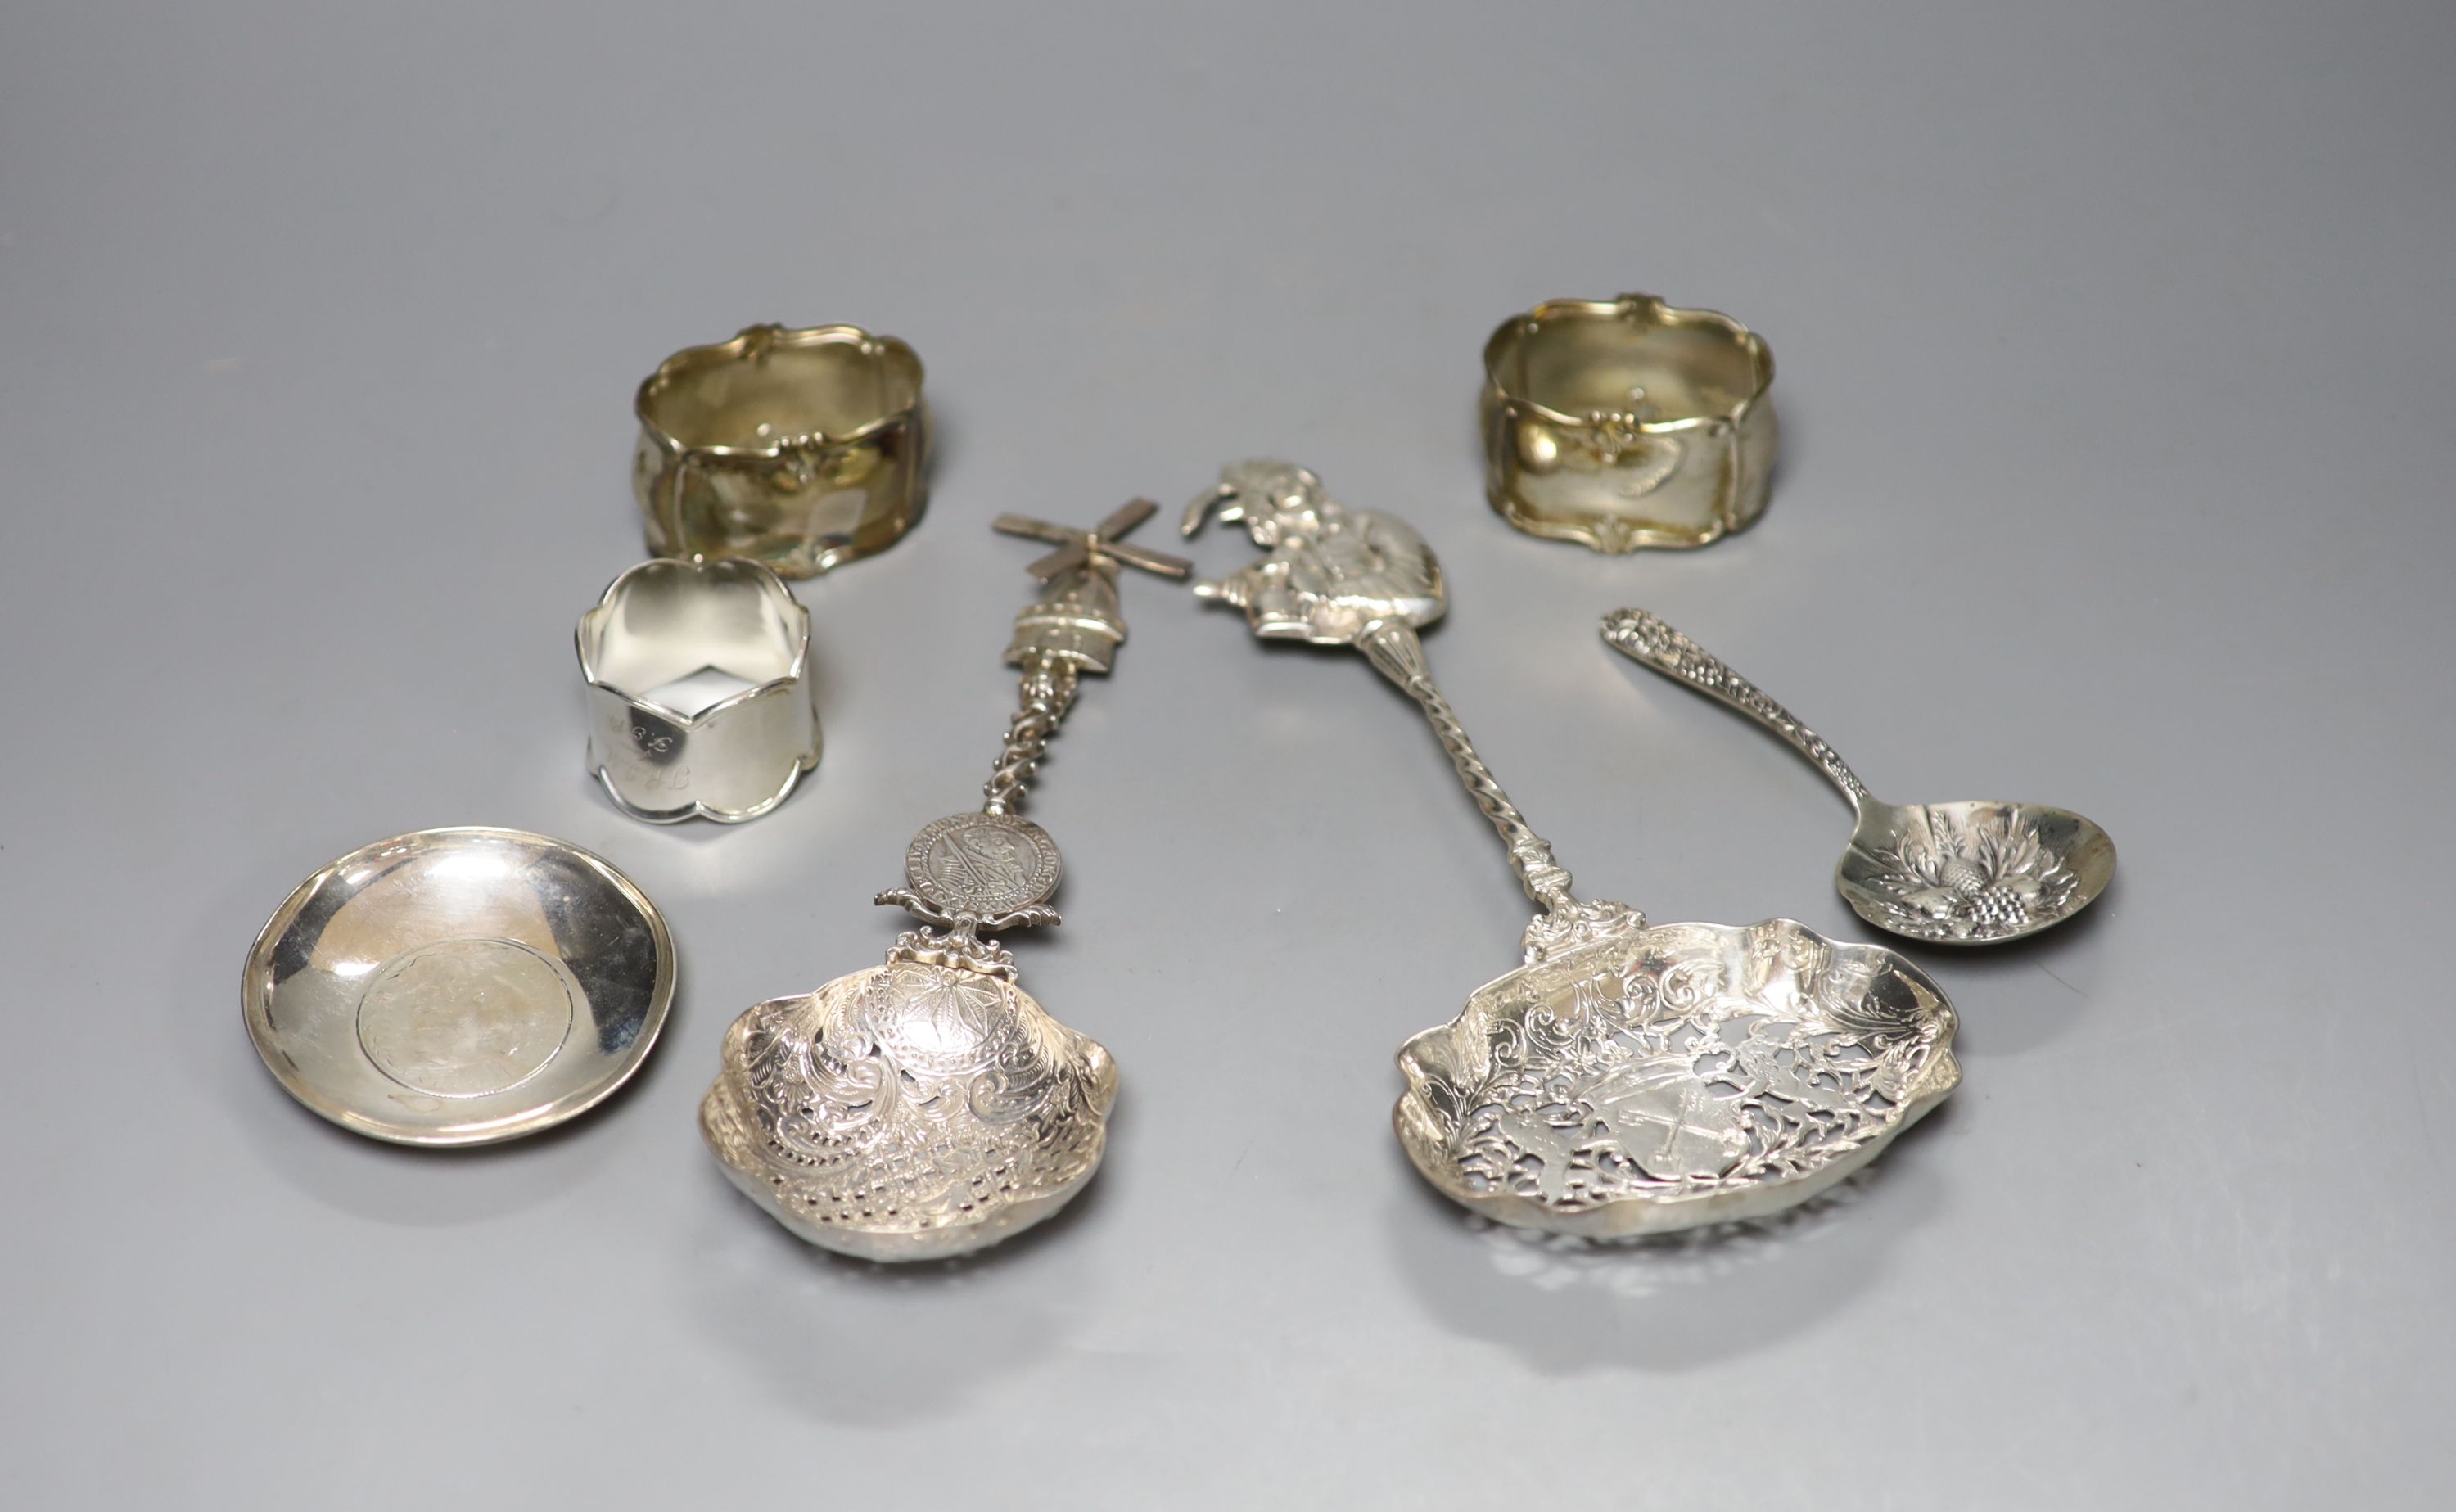 Two late 19th/early 20th century ornate pierced silver spoons, largest 23.7cm, a silver dish, sterling spoon and three napkin rings